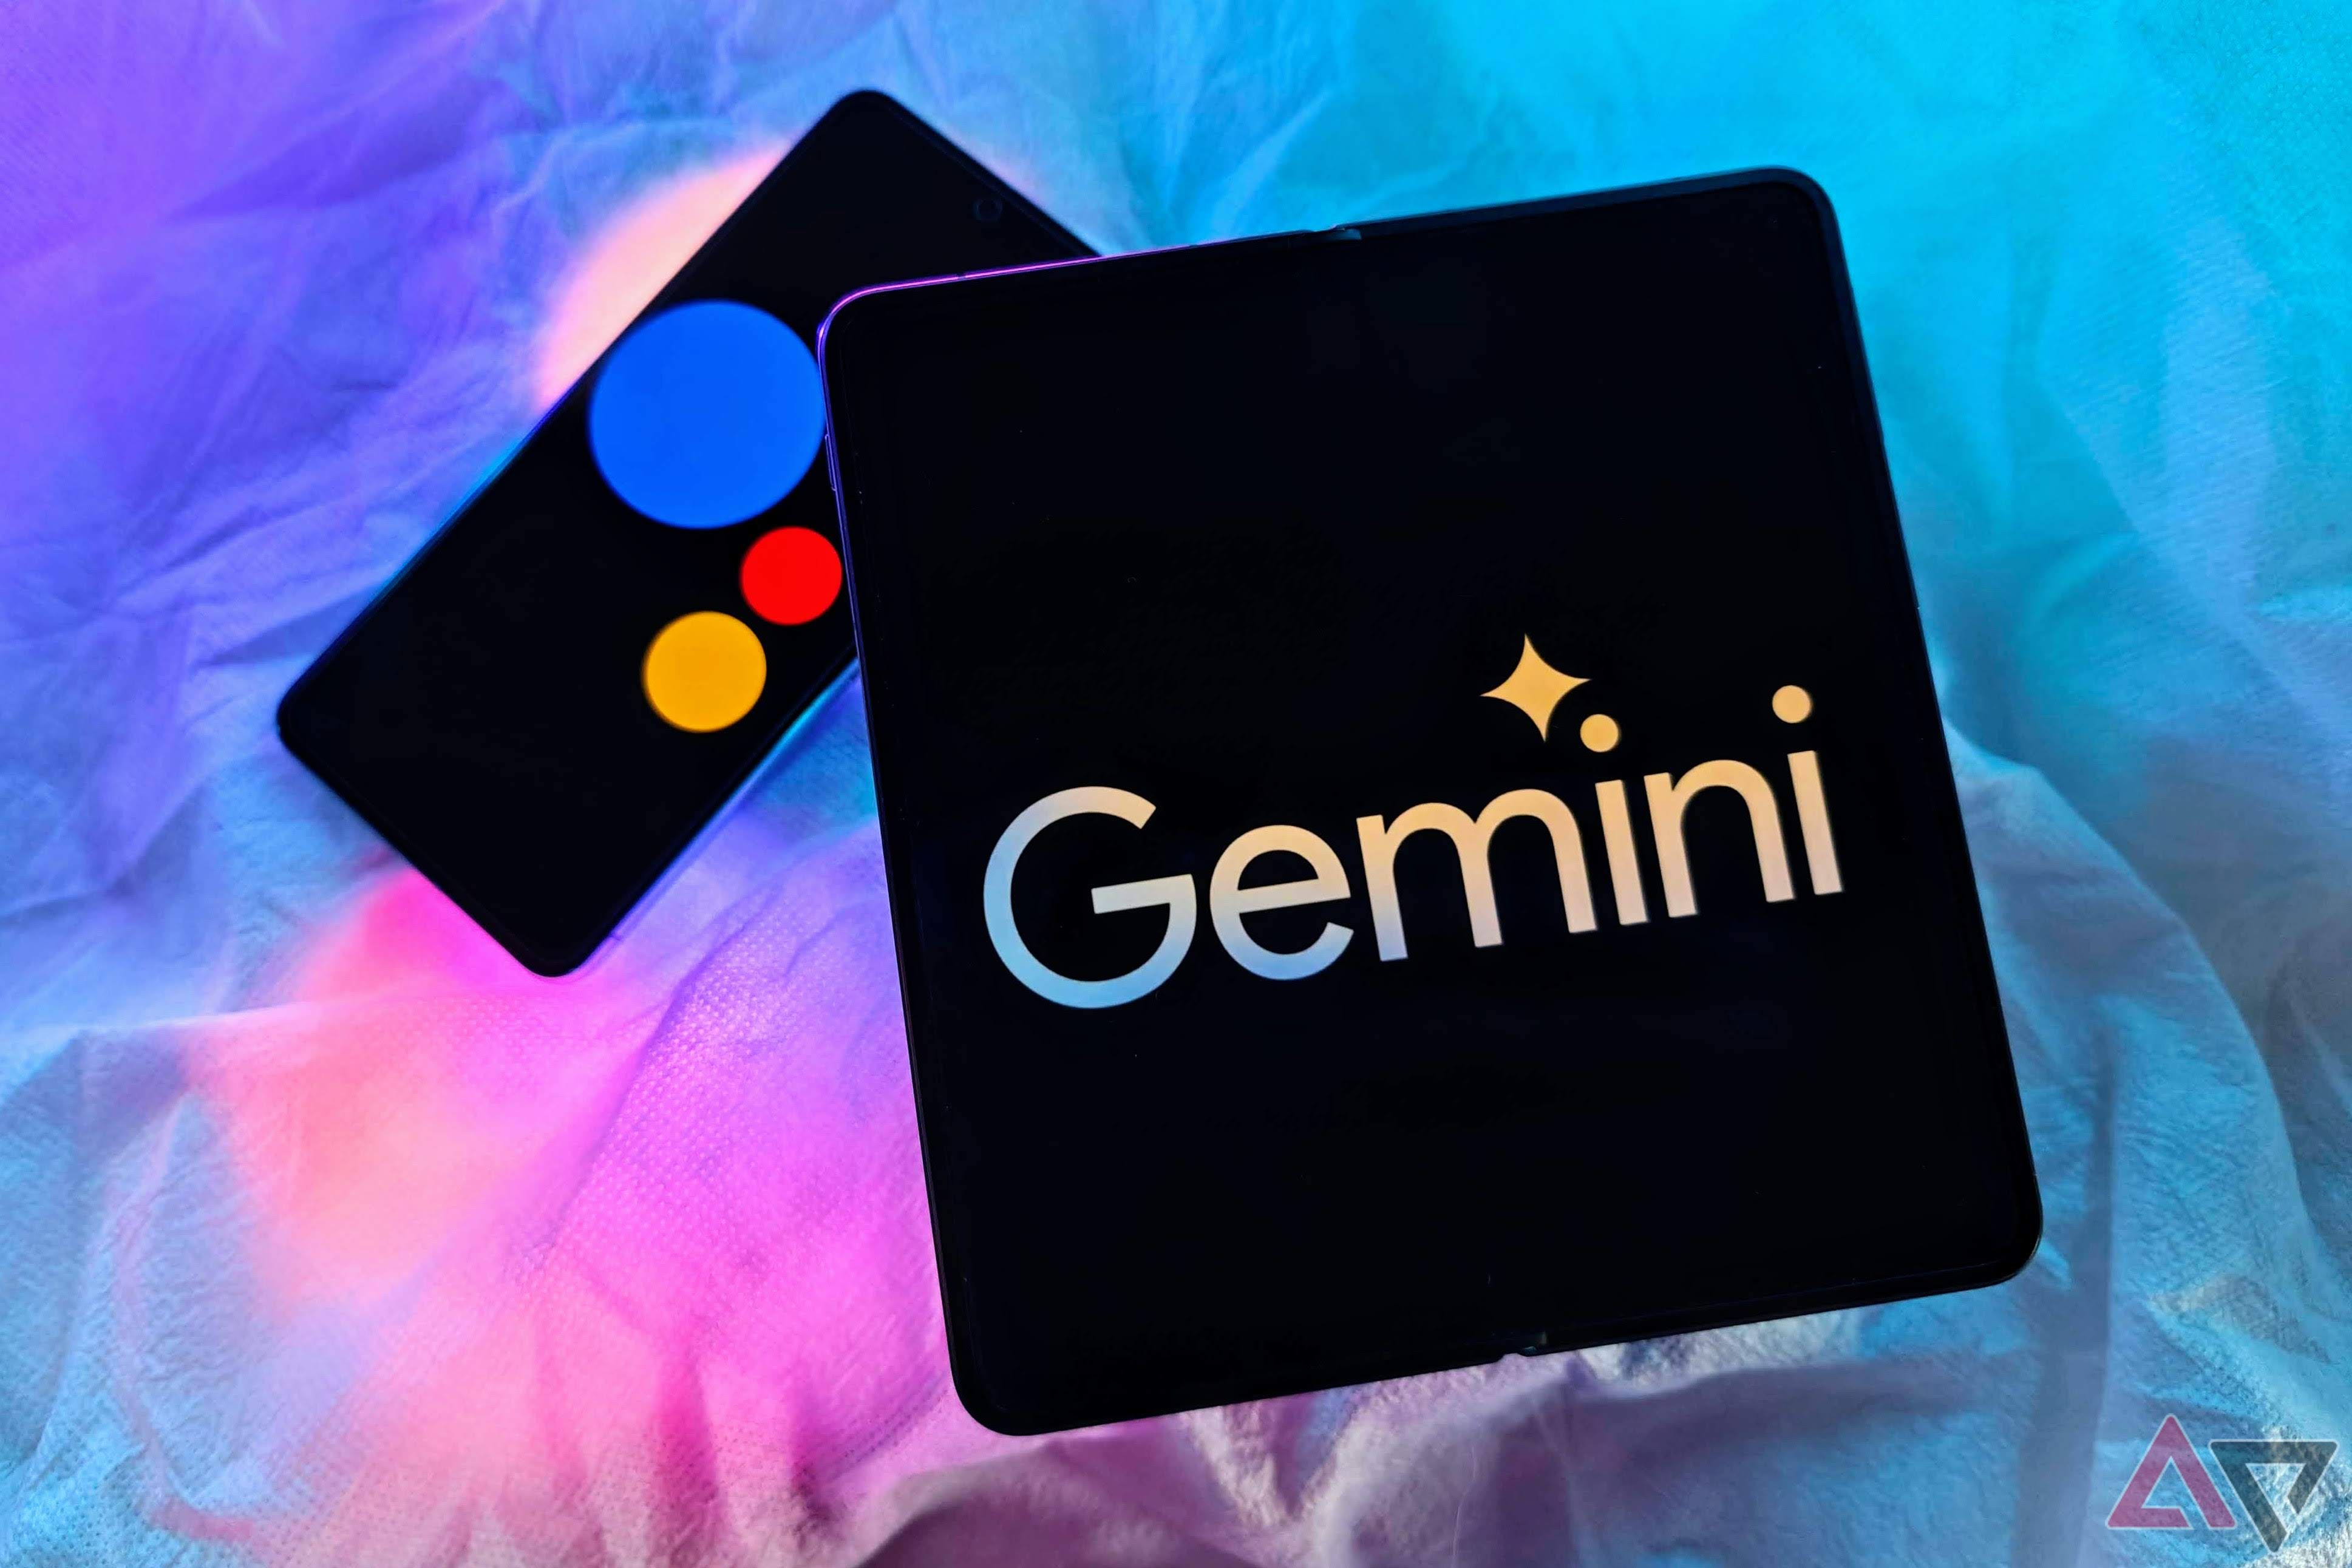 Image for article Google Gemini could soon get a lot faster on Android  Android Police